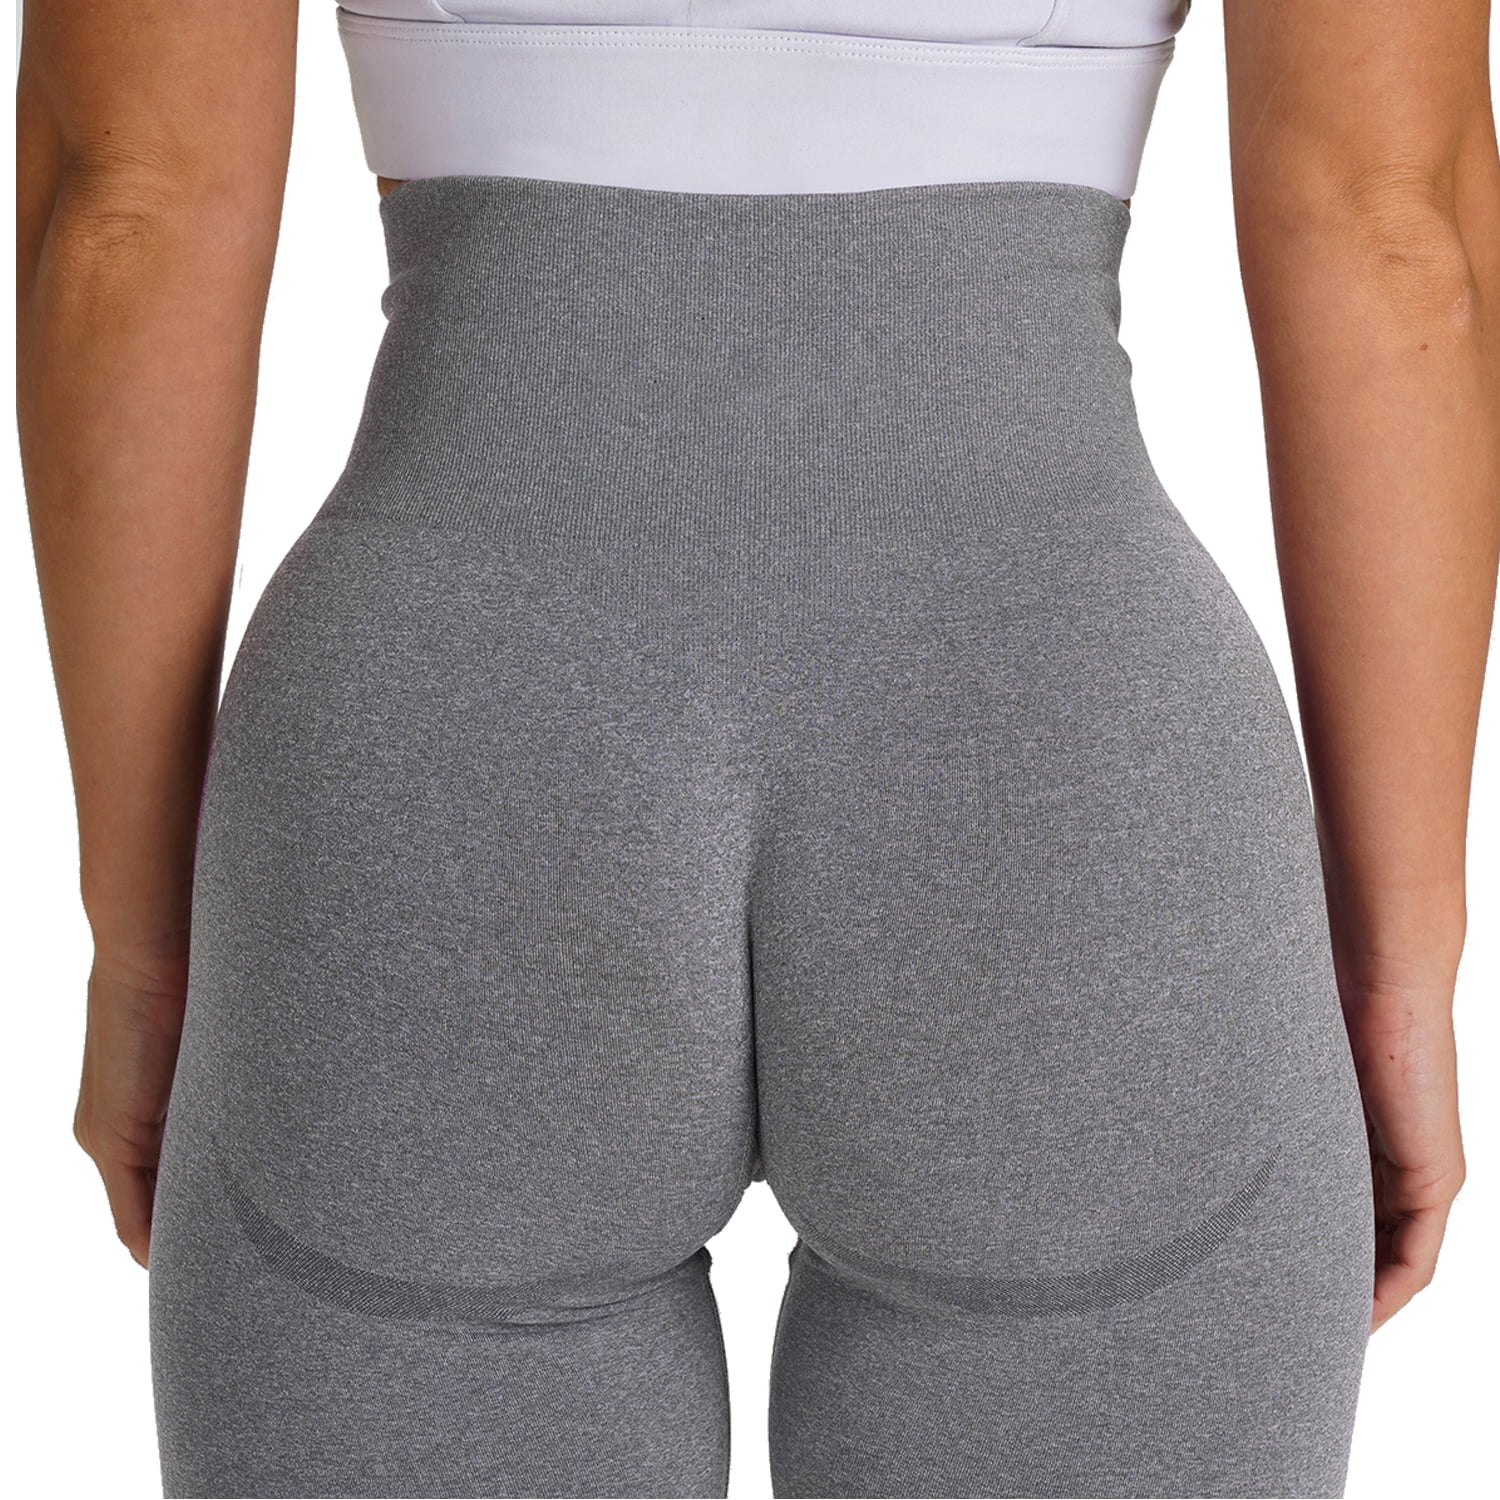 MISS MOLY Sports Workout Spandex Booty Shorts Butt Lifting Casual Yoga Athletic Stretch Activewear Peach Hip Pants 